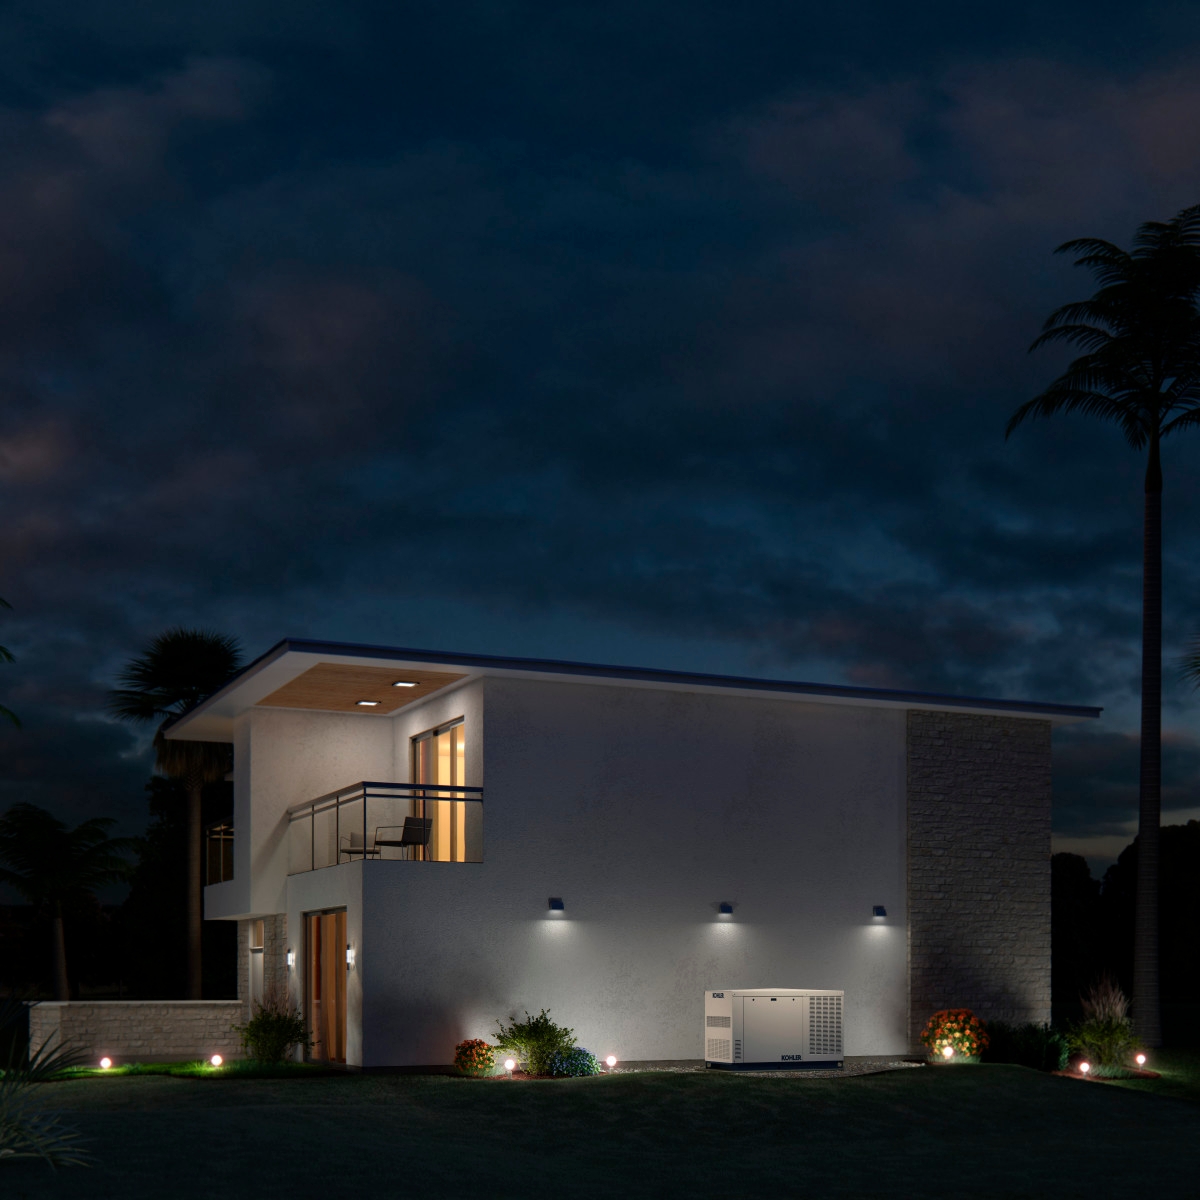 Modern architecture white house, under a clouded night sky, lit by outside spotlights and featuring a Kohler Generator nestled up against the base of the home.
DAM # aab96124
Article [1]: Does a Generator Work For Your Home Type
[Article Card [1] 1:1] 